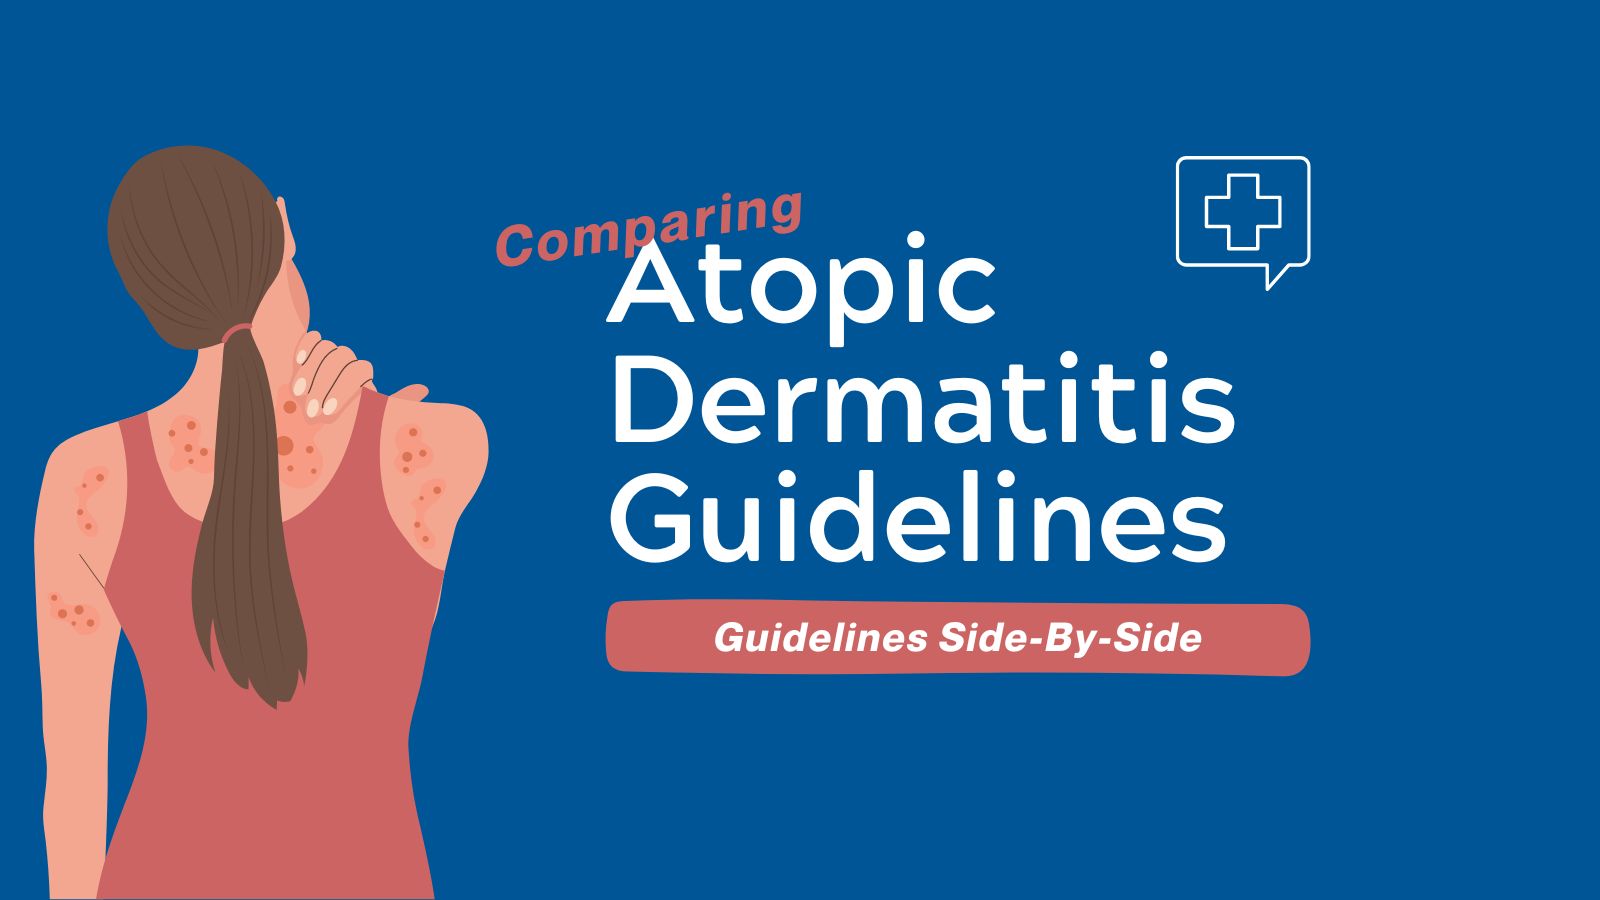 Comparing Atopic Dermatitis Guidelines Side-By-Side